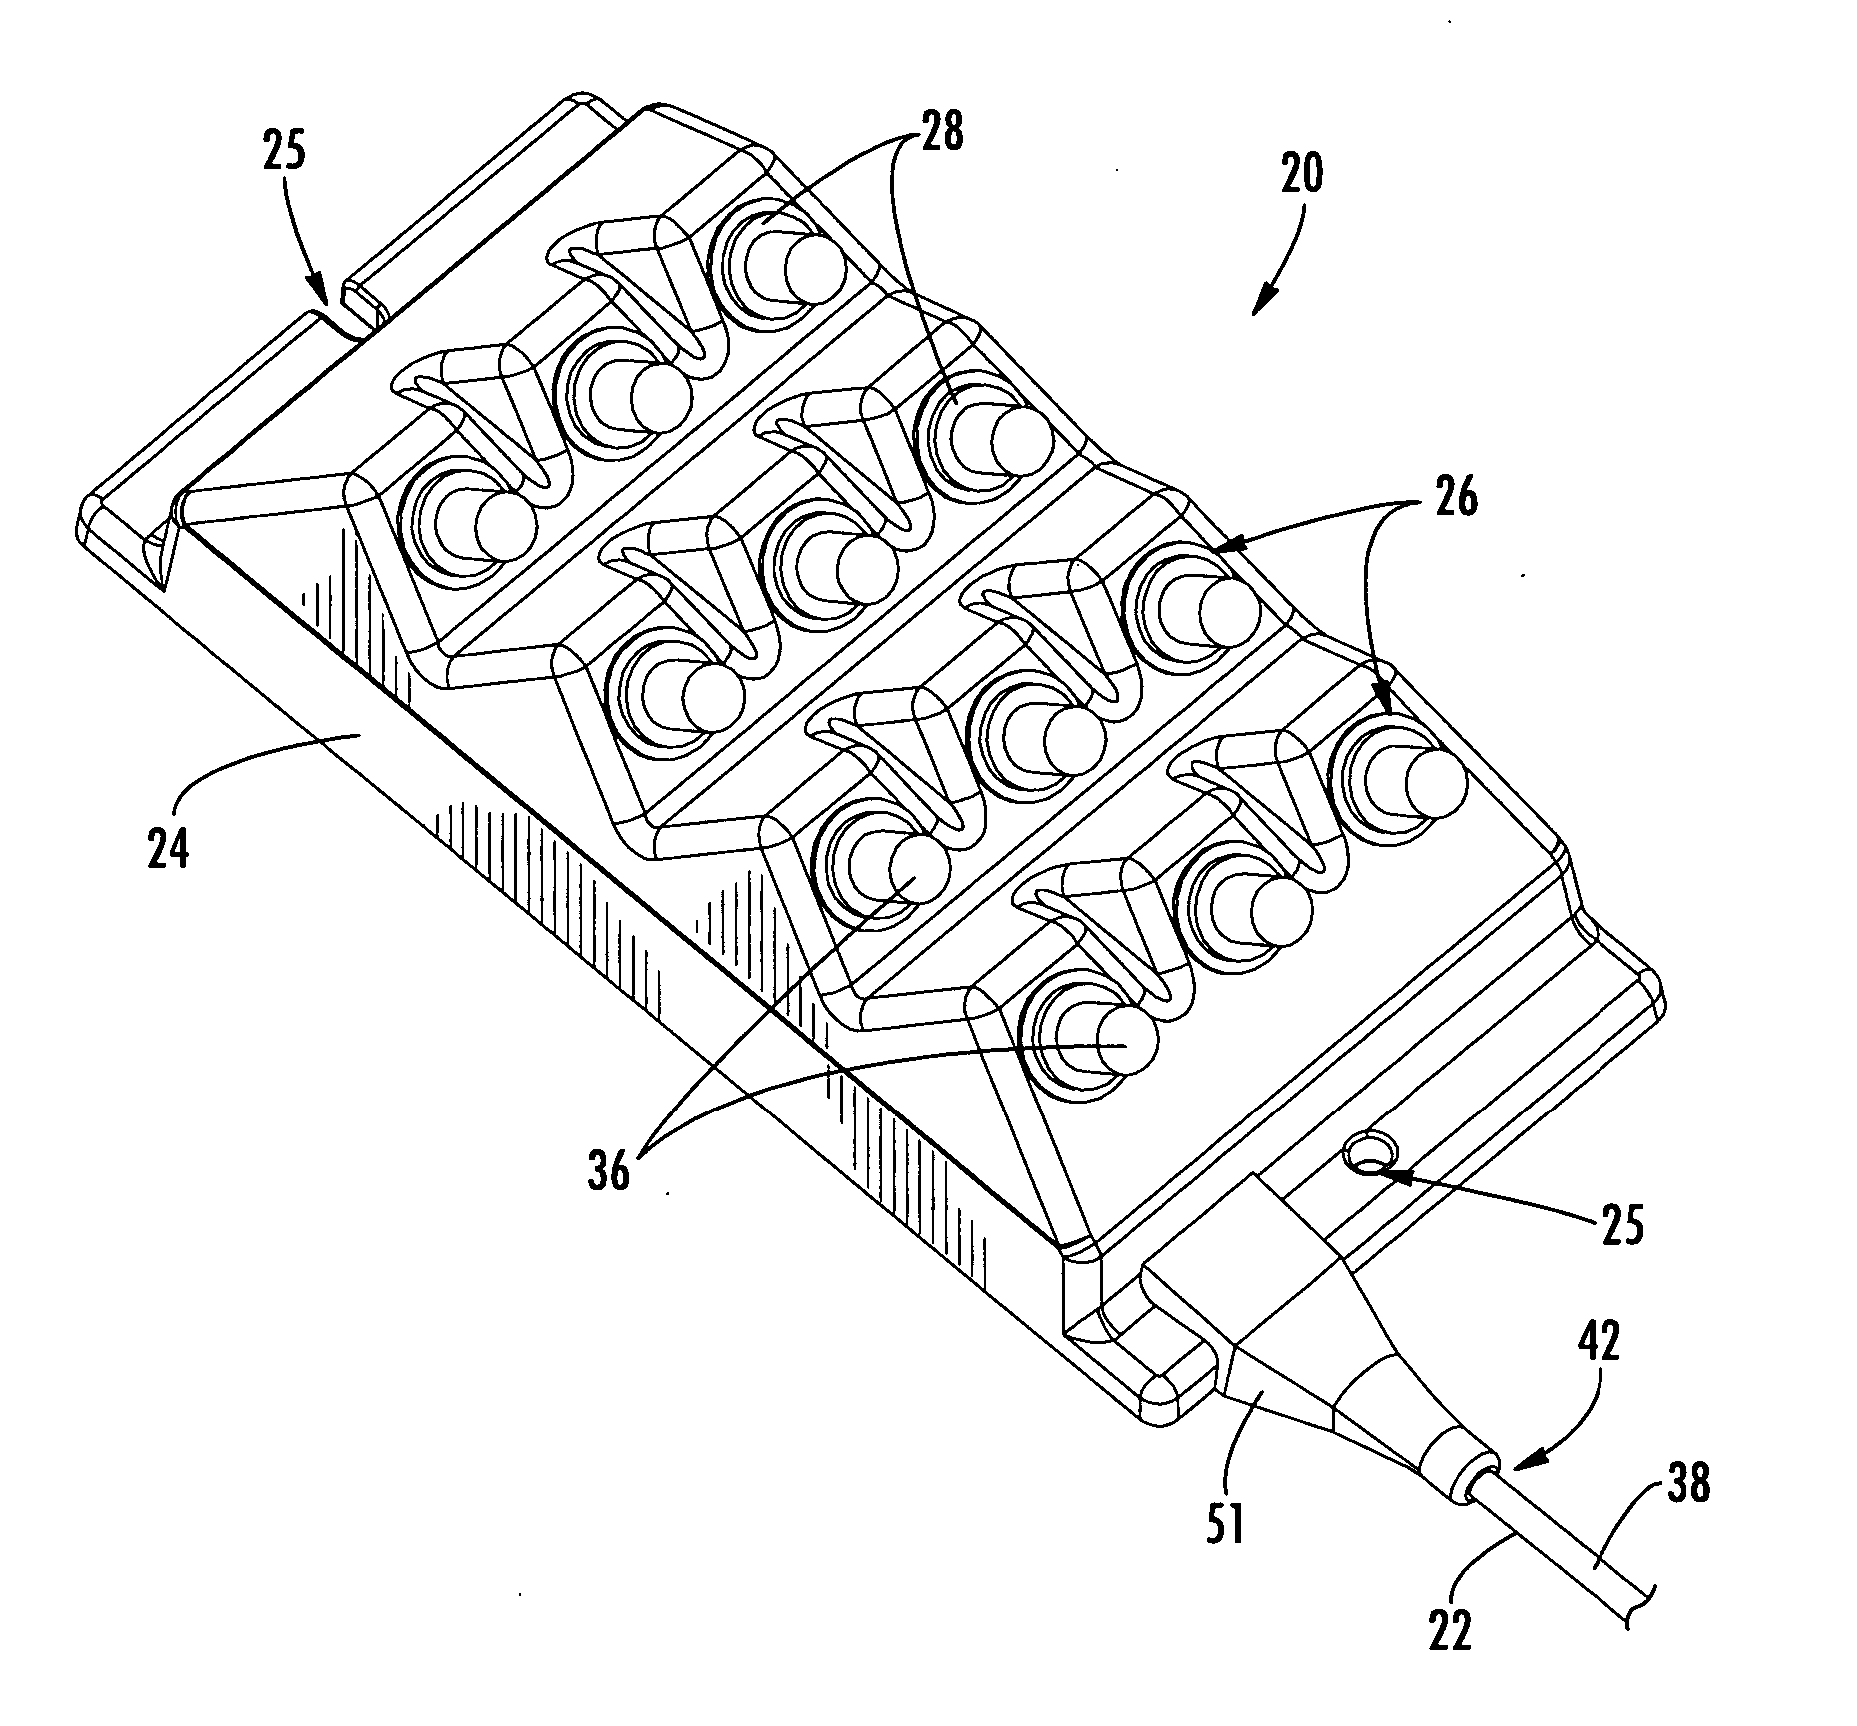 Overmolded multi-port optical connection terminal having means for accommodating excess fiber length